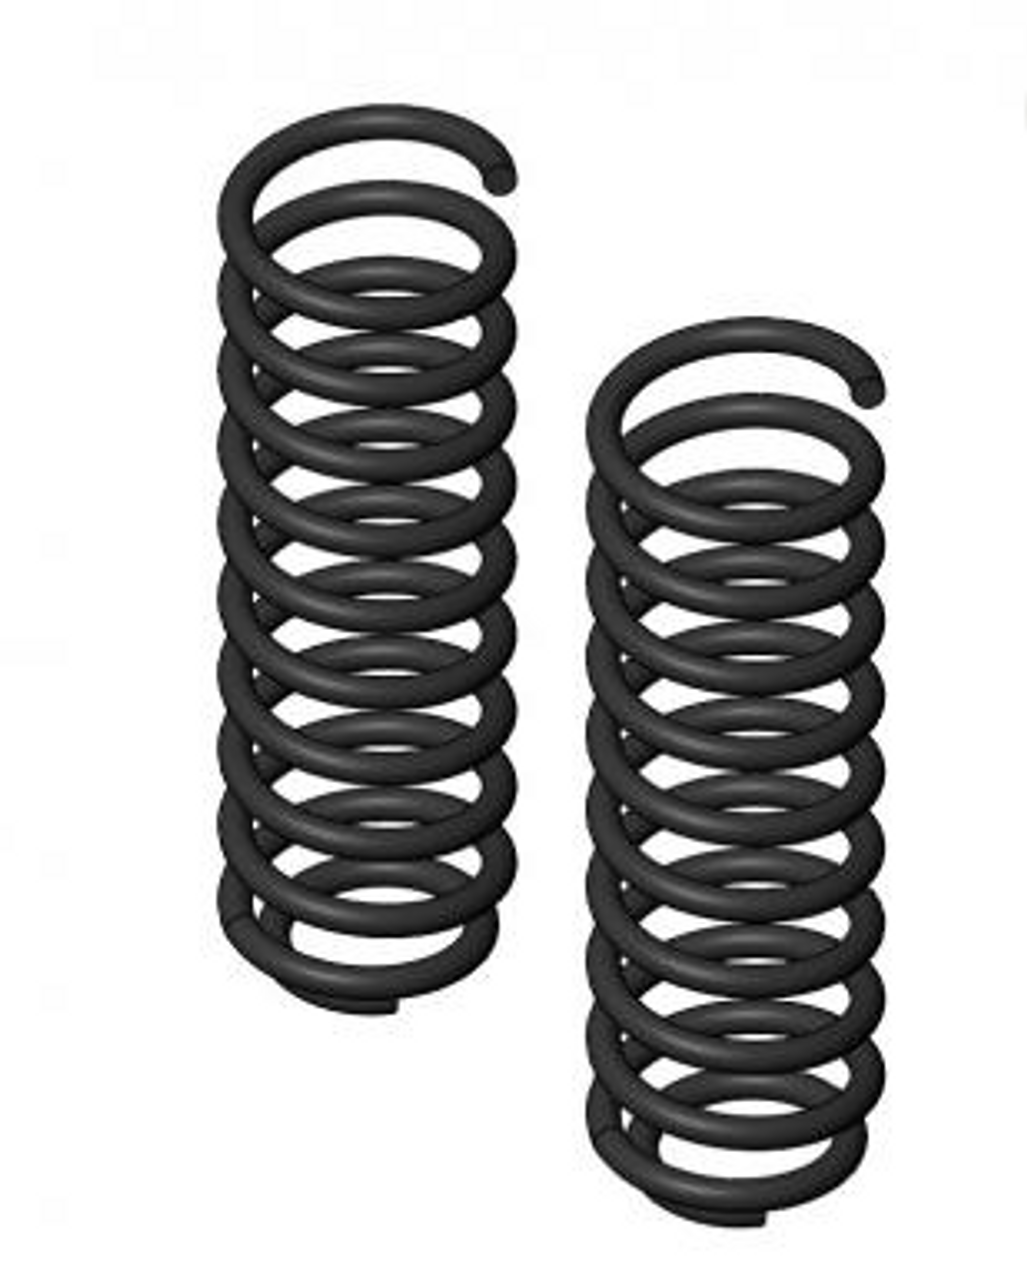 Clayton Off Road 1508251 2.5" Rear Coil Spring Pair for Jeep Wrangler JK 2007-2018